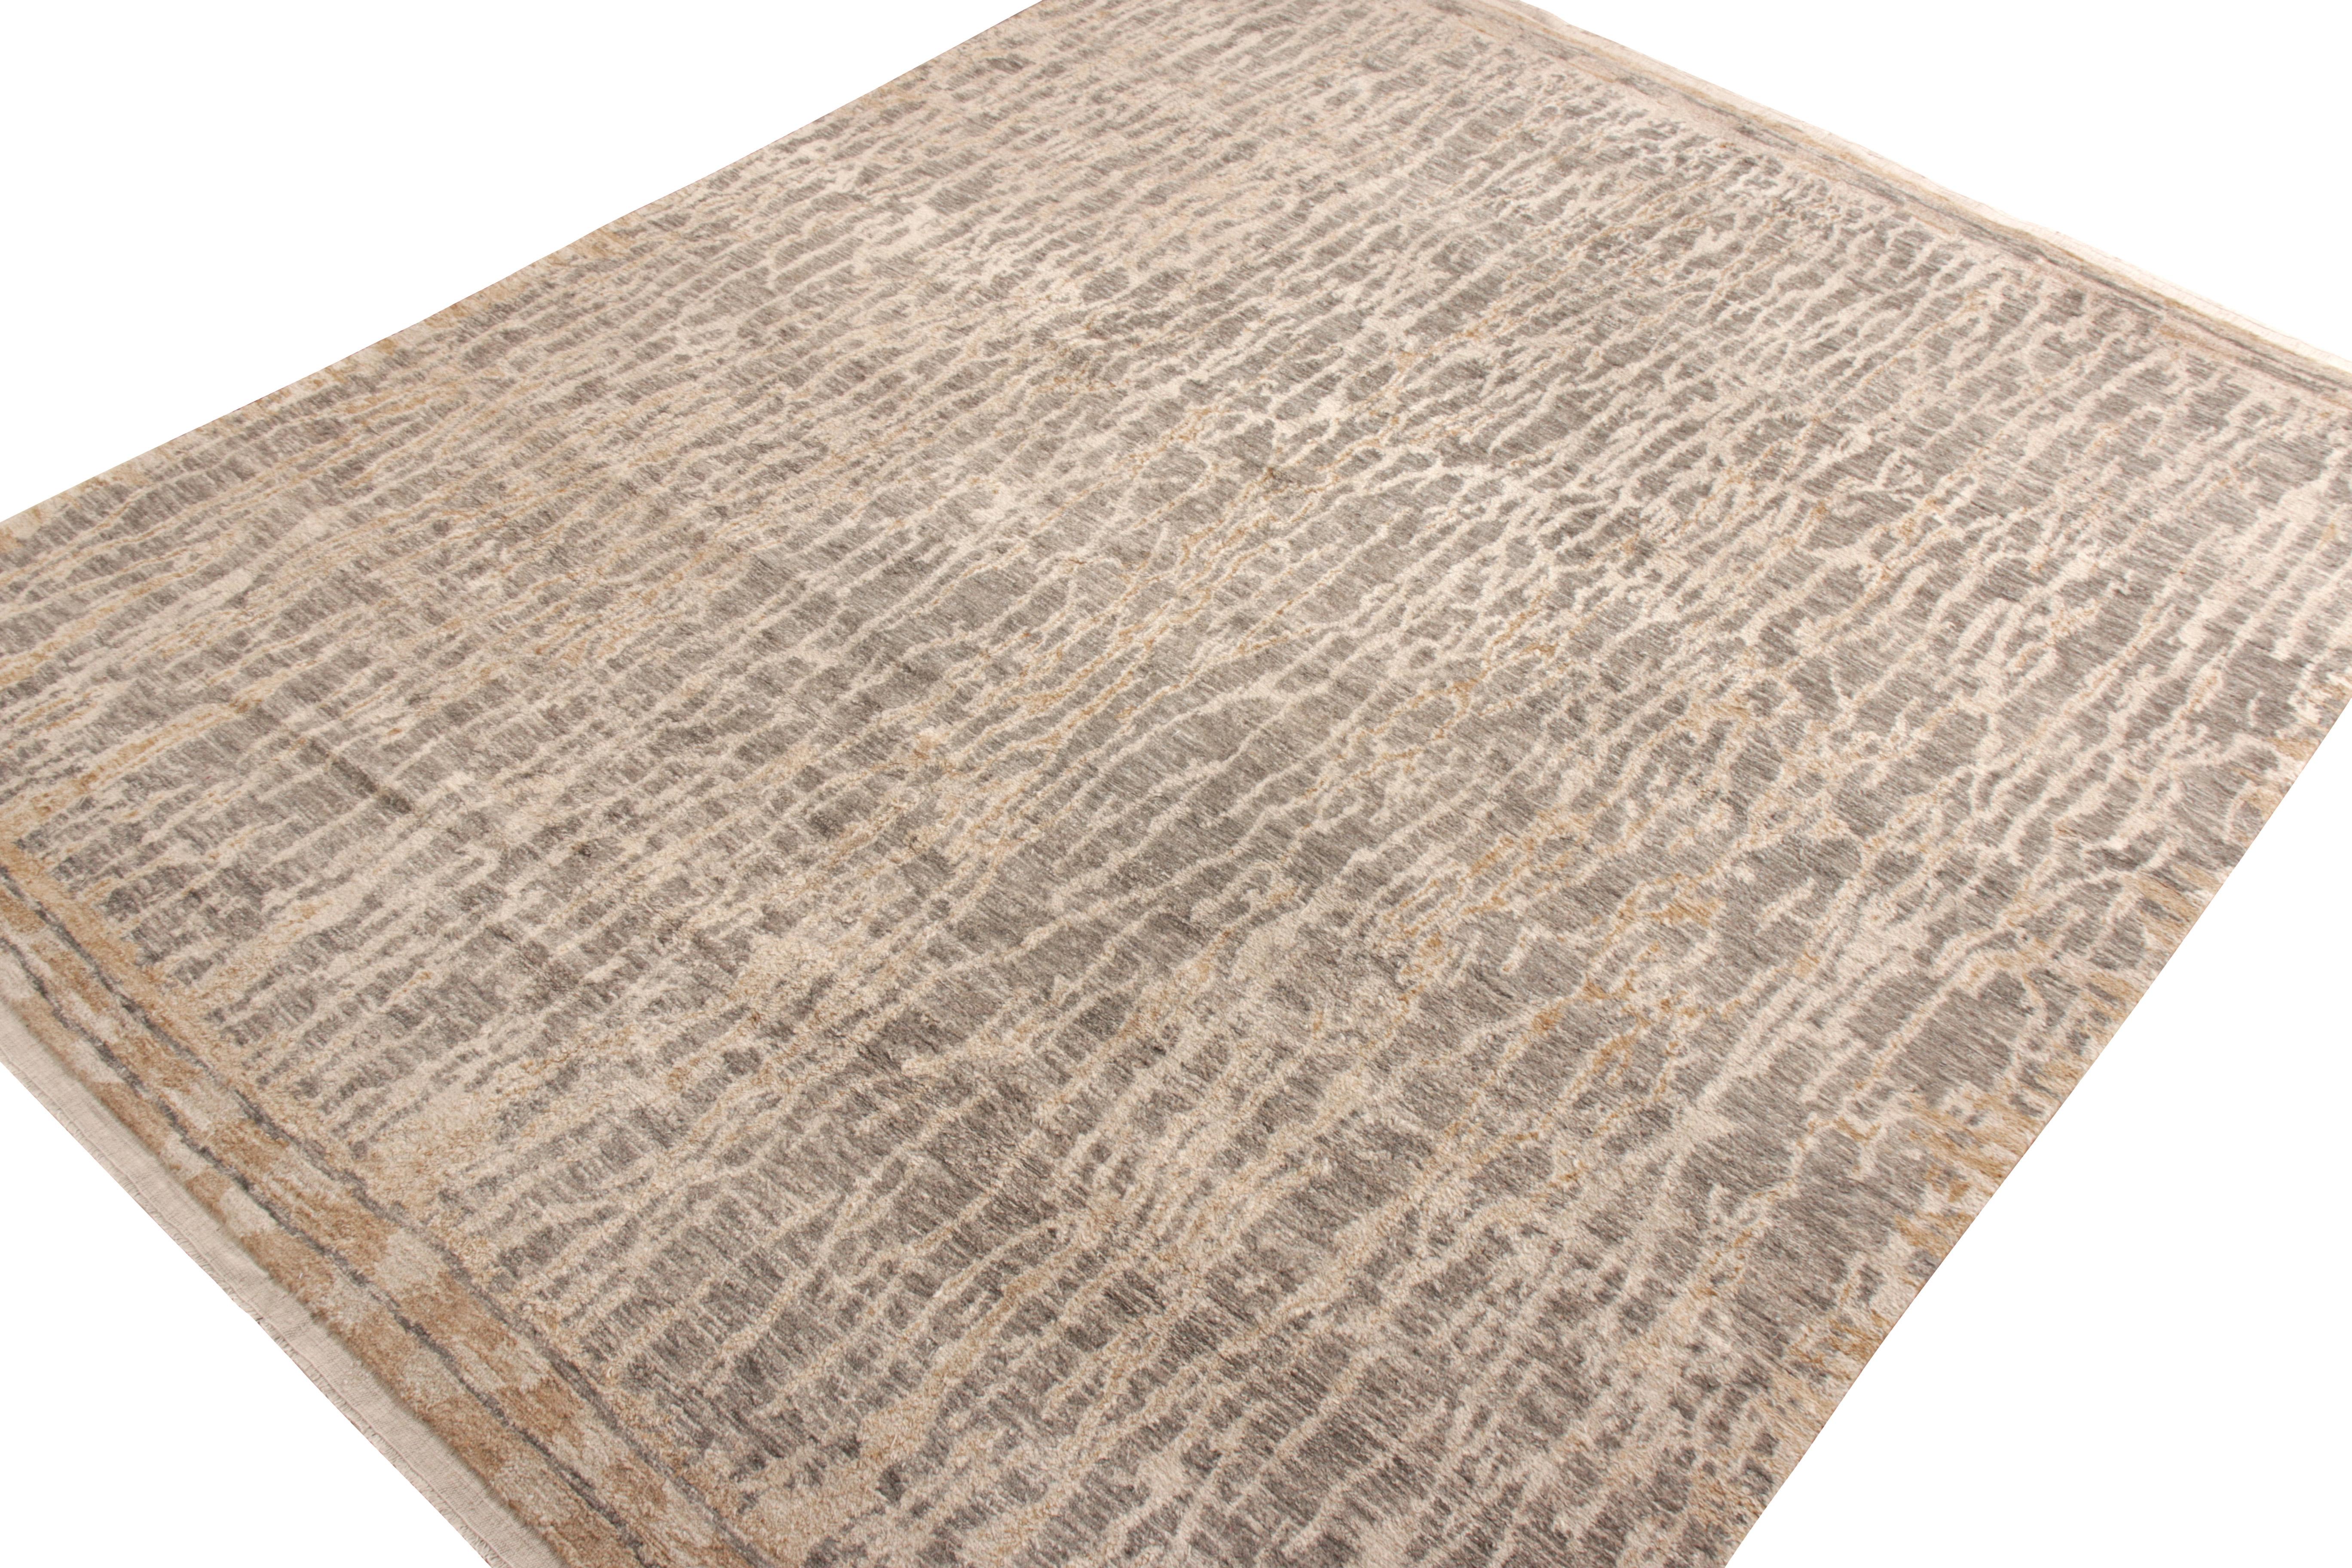 Indian Rug & Kilim’s Modern Rug in all over Beige, Gray and White Abstract Pattern For Sale